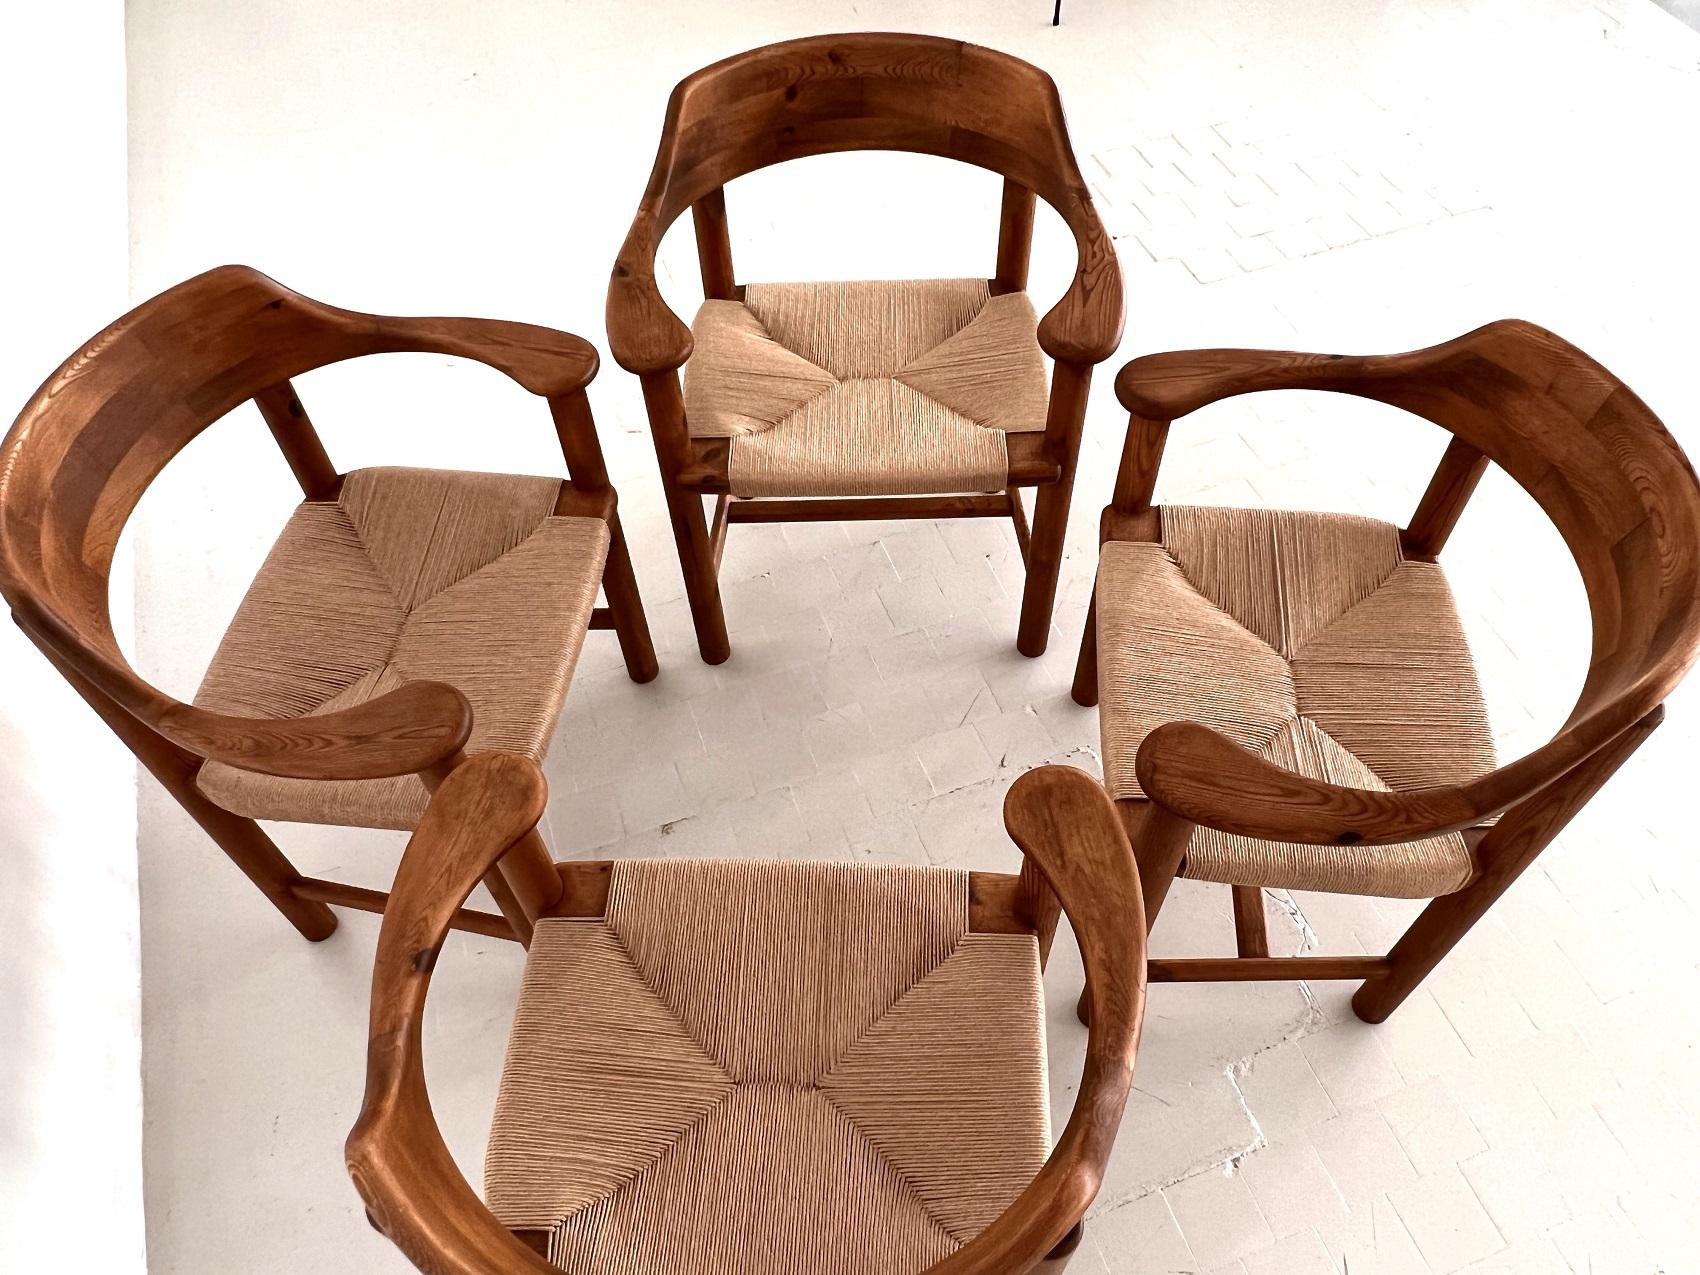 Rainer Daumiller, pinewood, paper cord, Denmark, 1970s

Beautiful, organic and natural set of 4 armchairs or dining chairs in solid darkened pine.
Gorgeous natural expression and grain of the colored wood. 
The woven seat in paper cord gives the